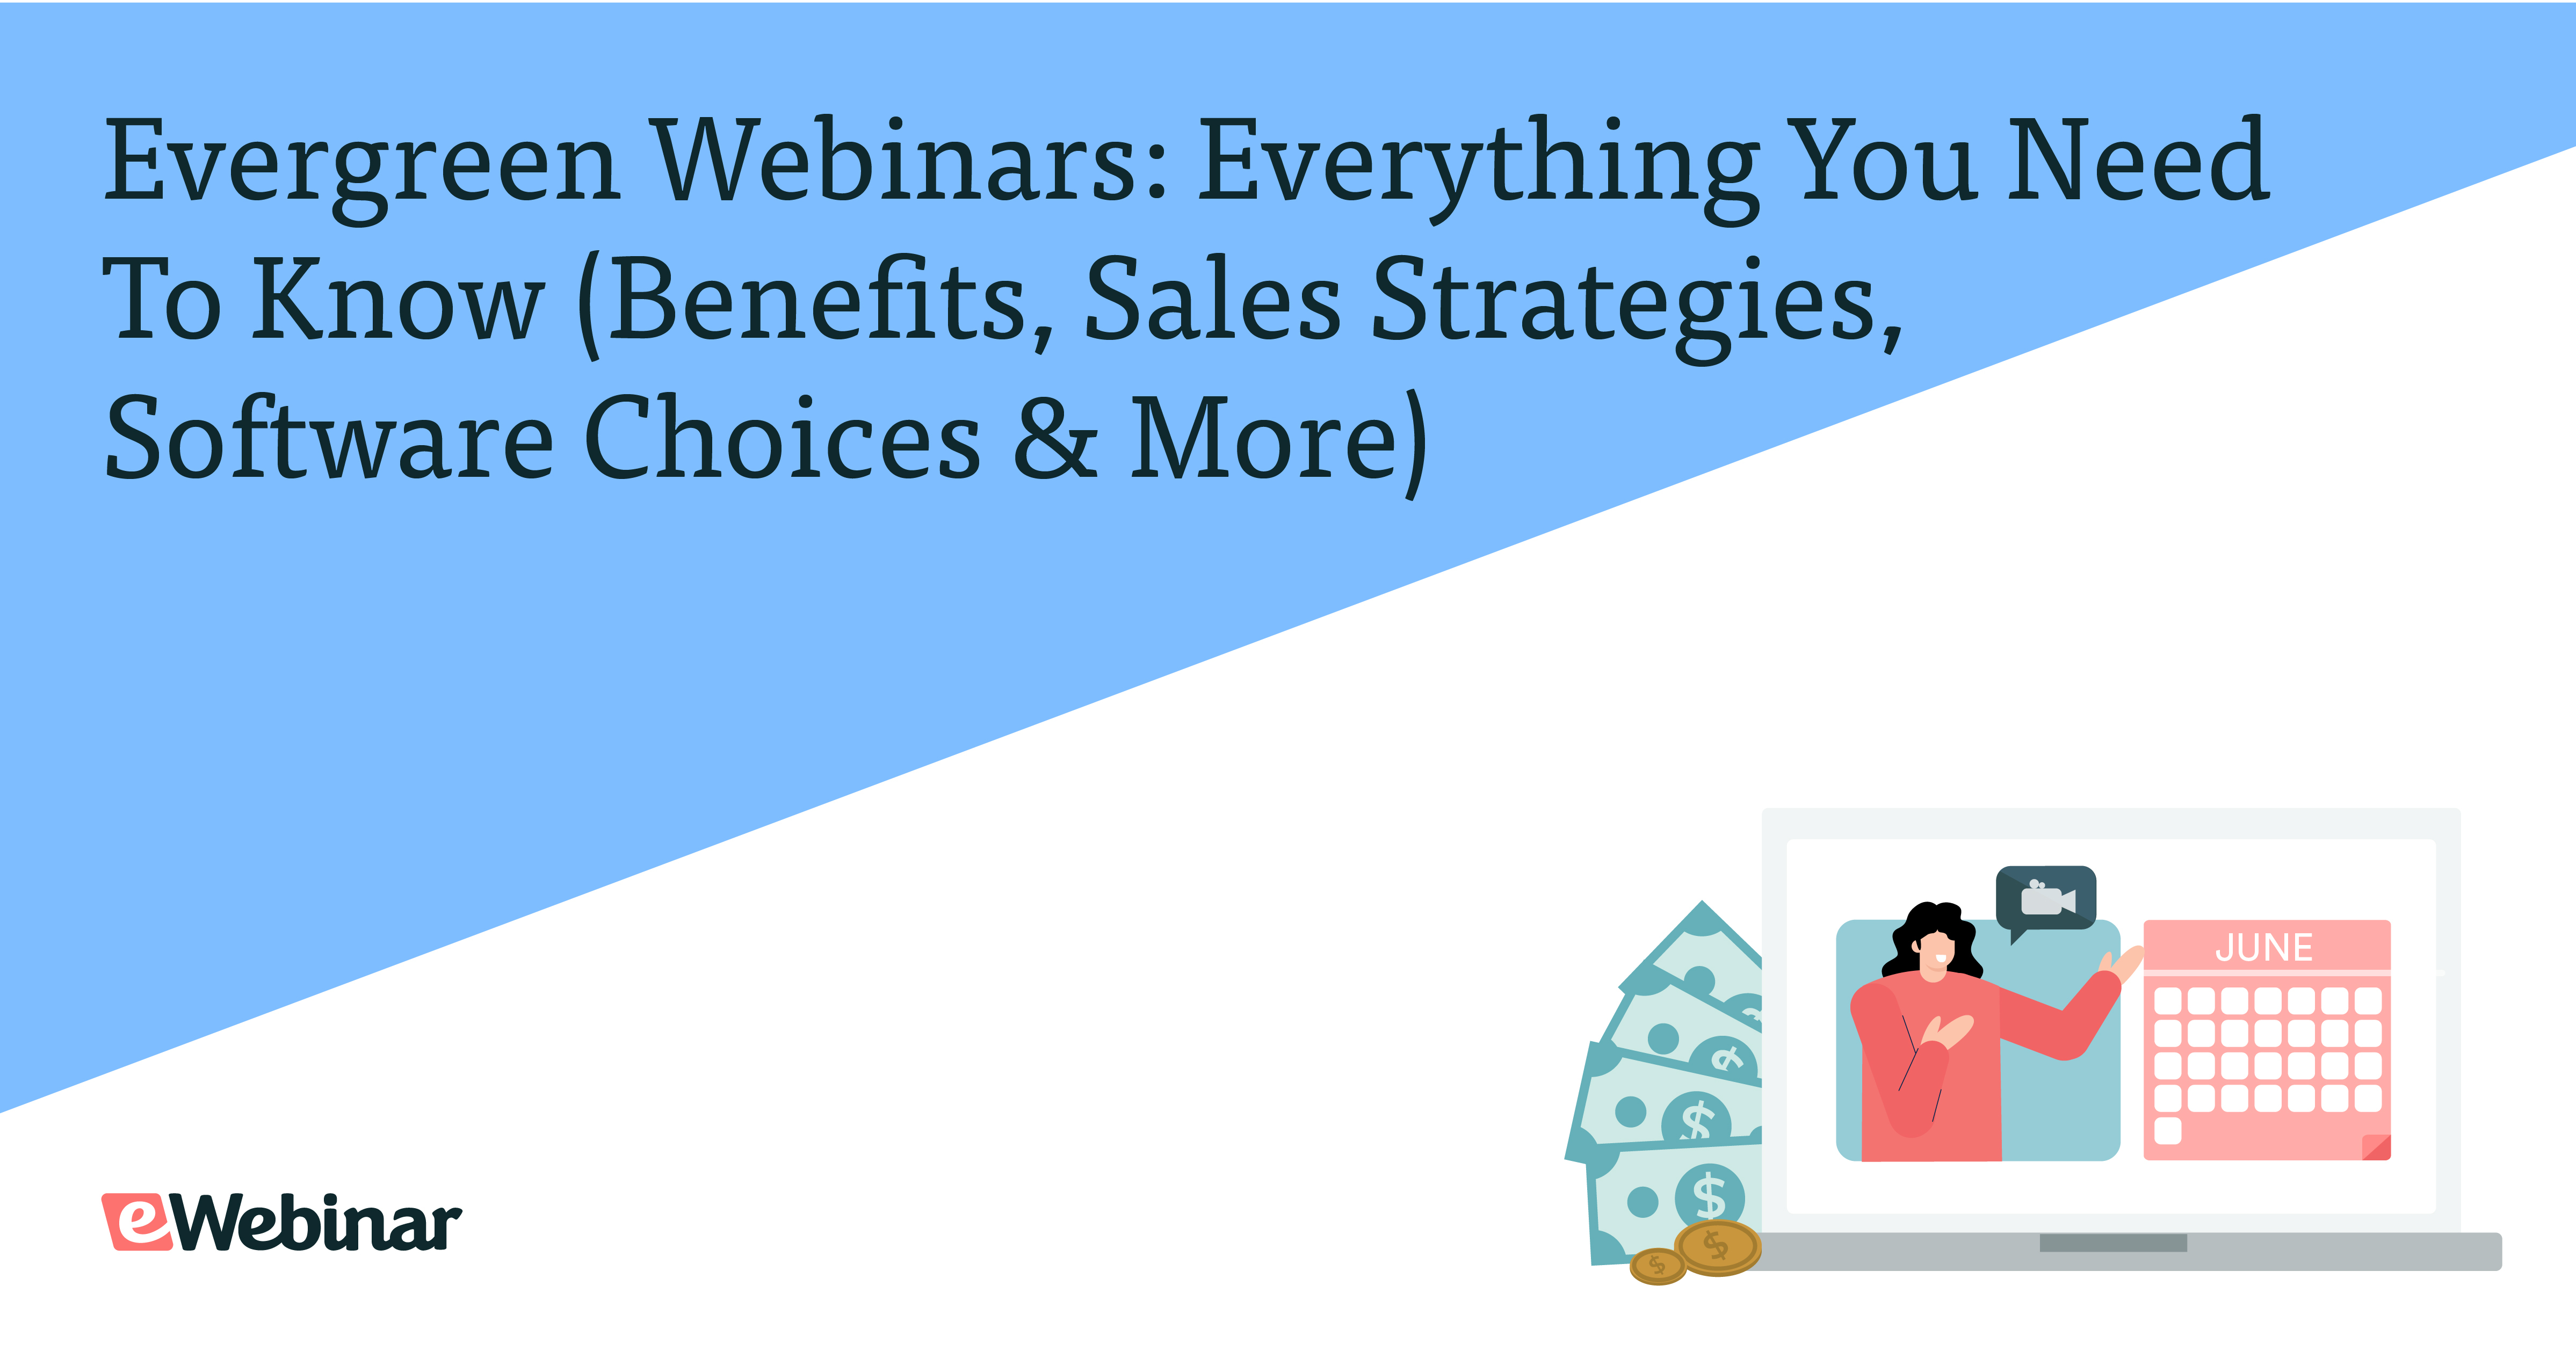 Evergreen Webinars: Everything You Need to Know (Benefits, Sales Strategies, Software Choices and More!)